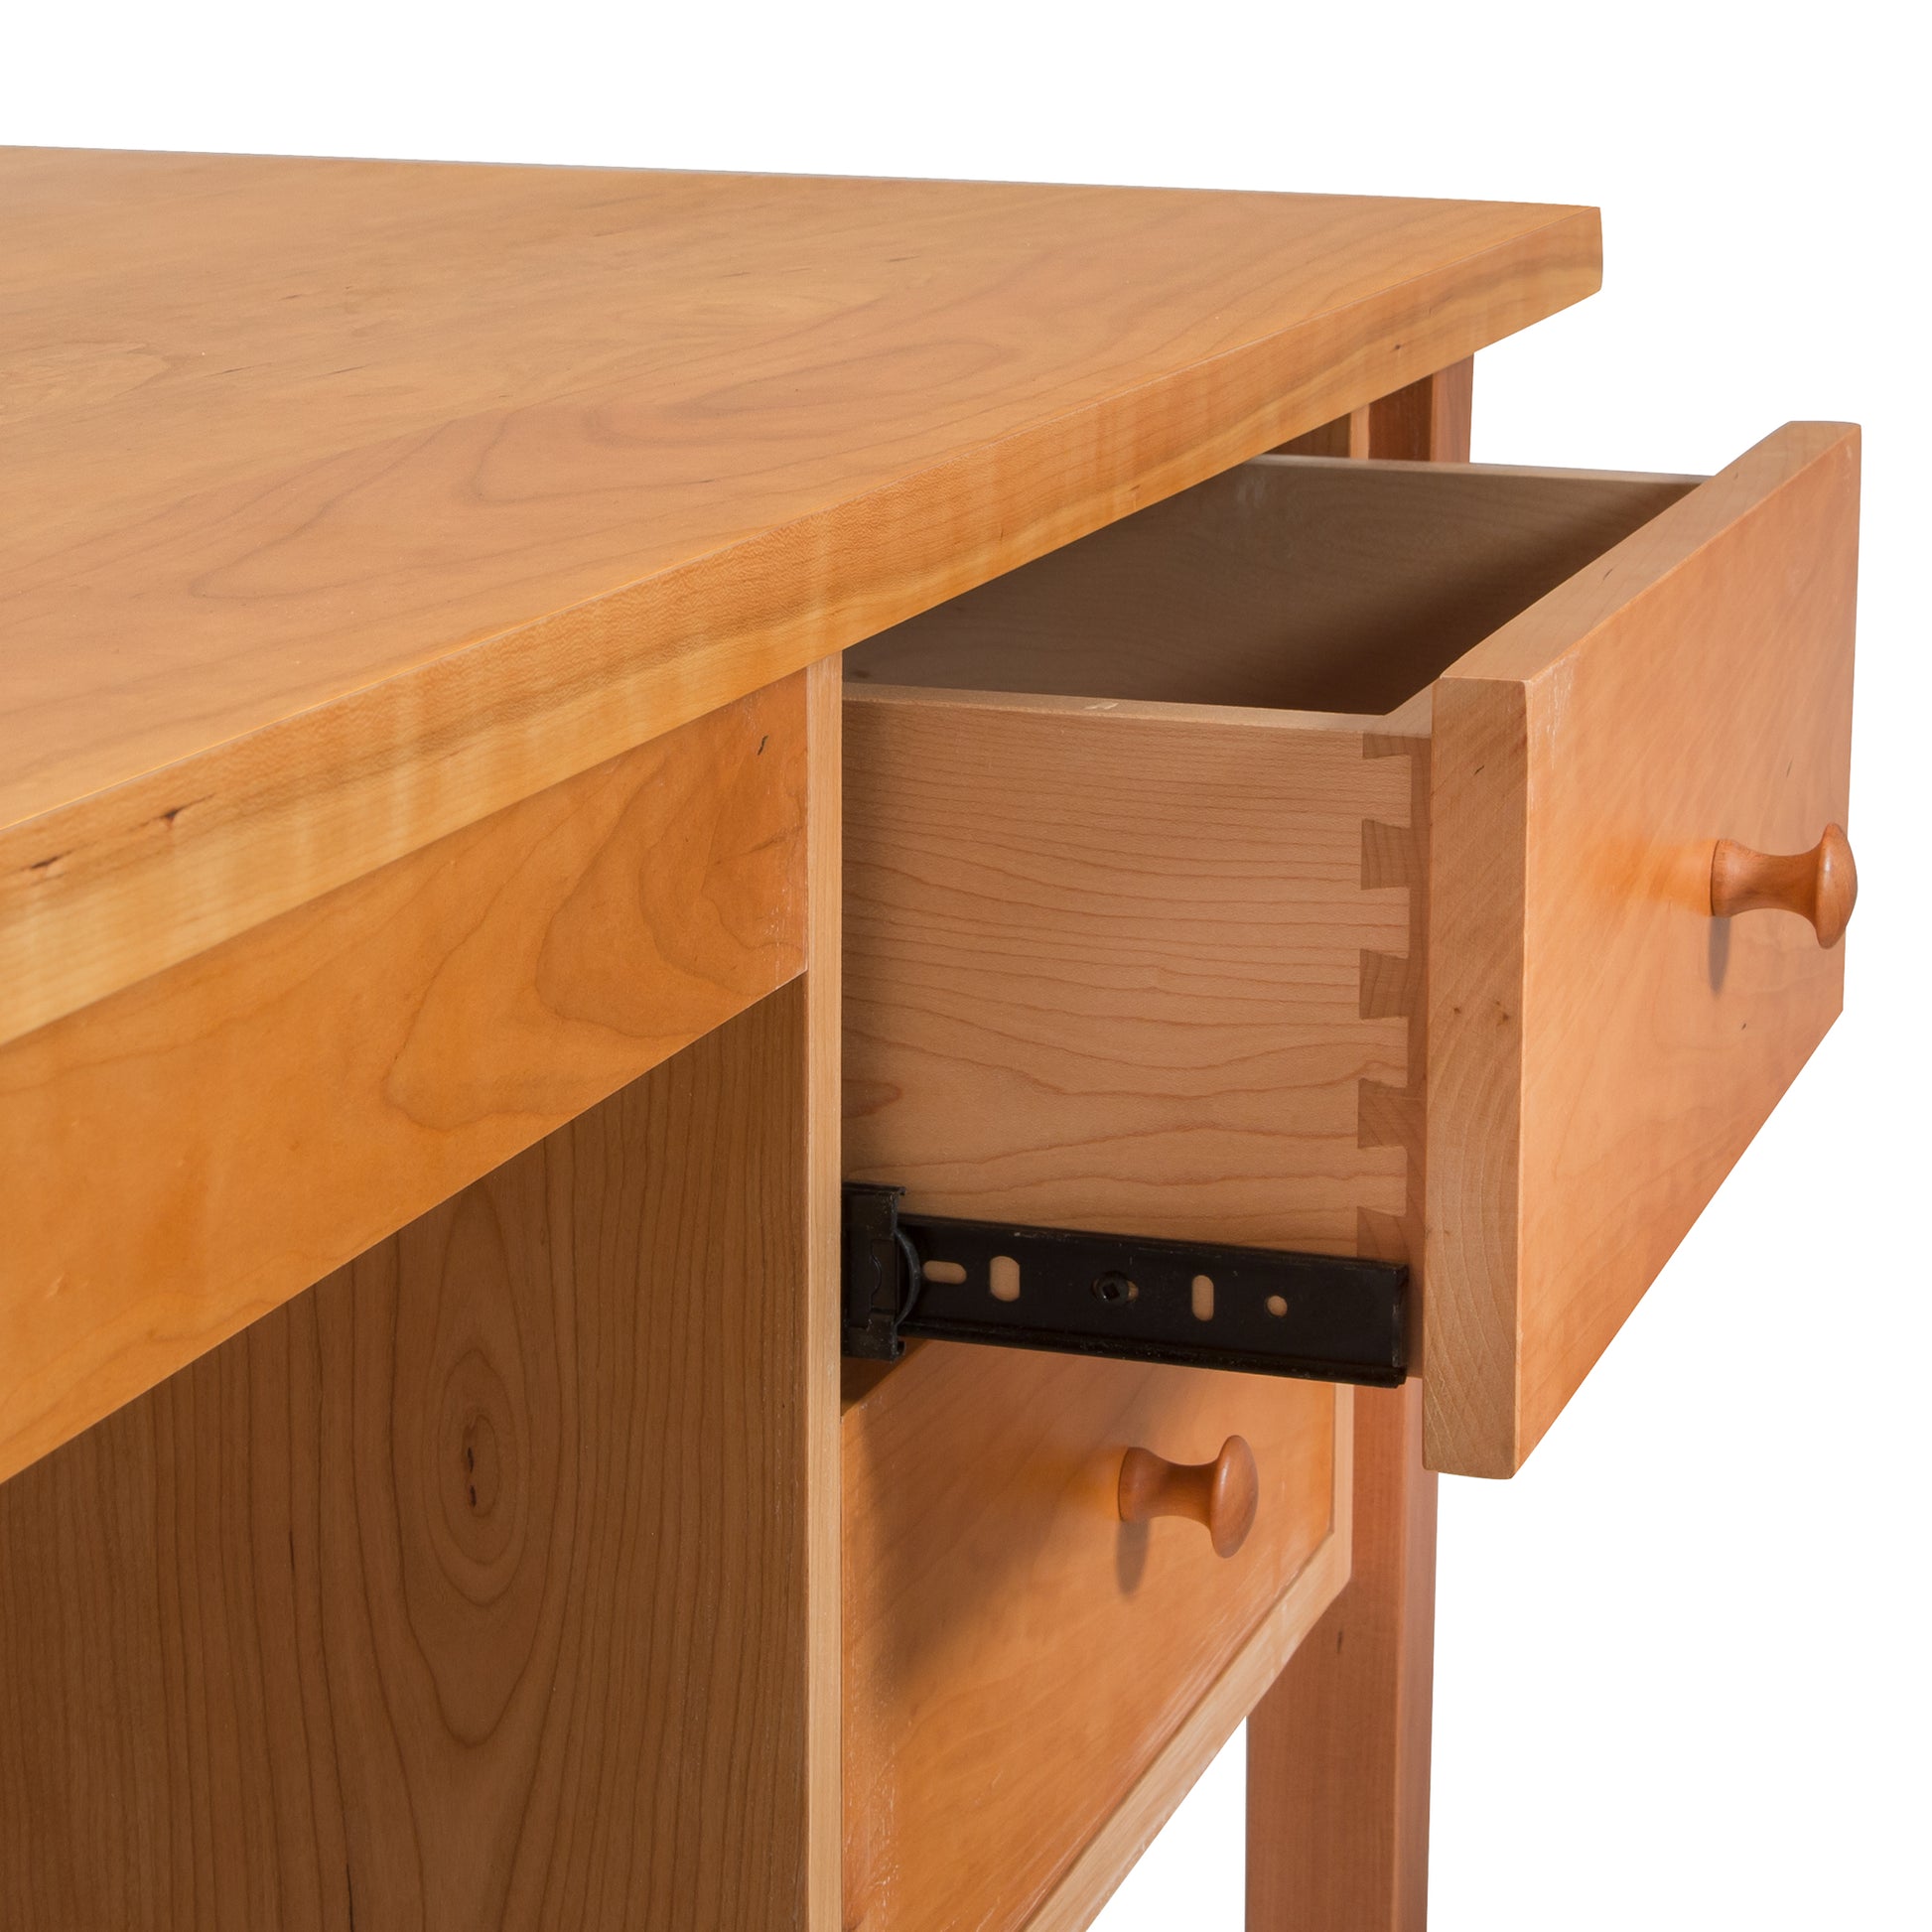 A Large Wood Flare Leg Executive Desk by Lyndon Furniture, with a drawer, that is sustainably harvested.